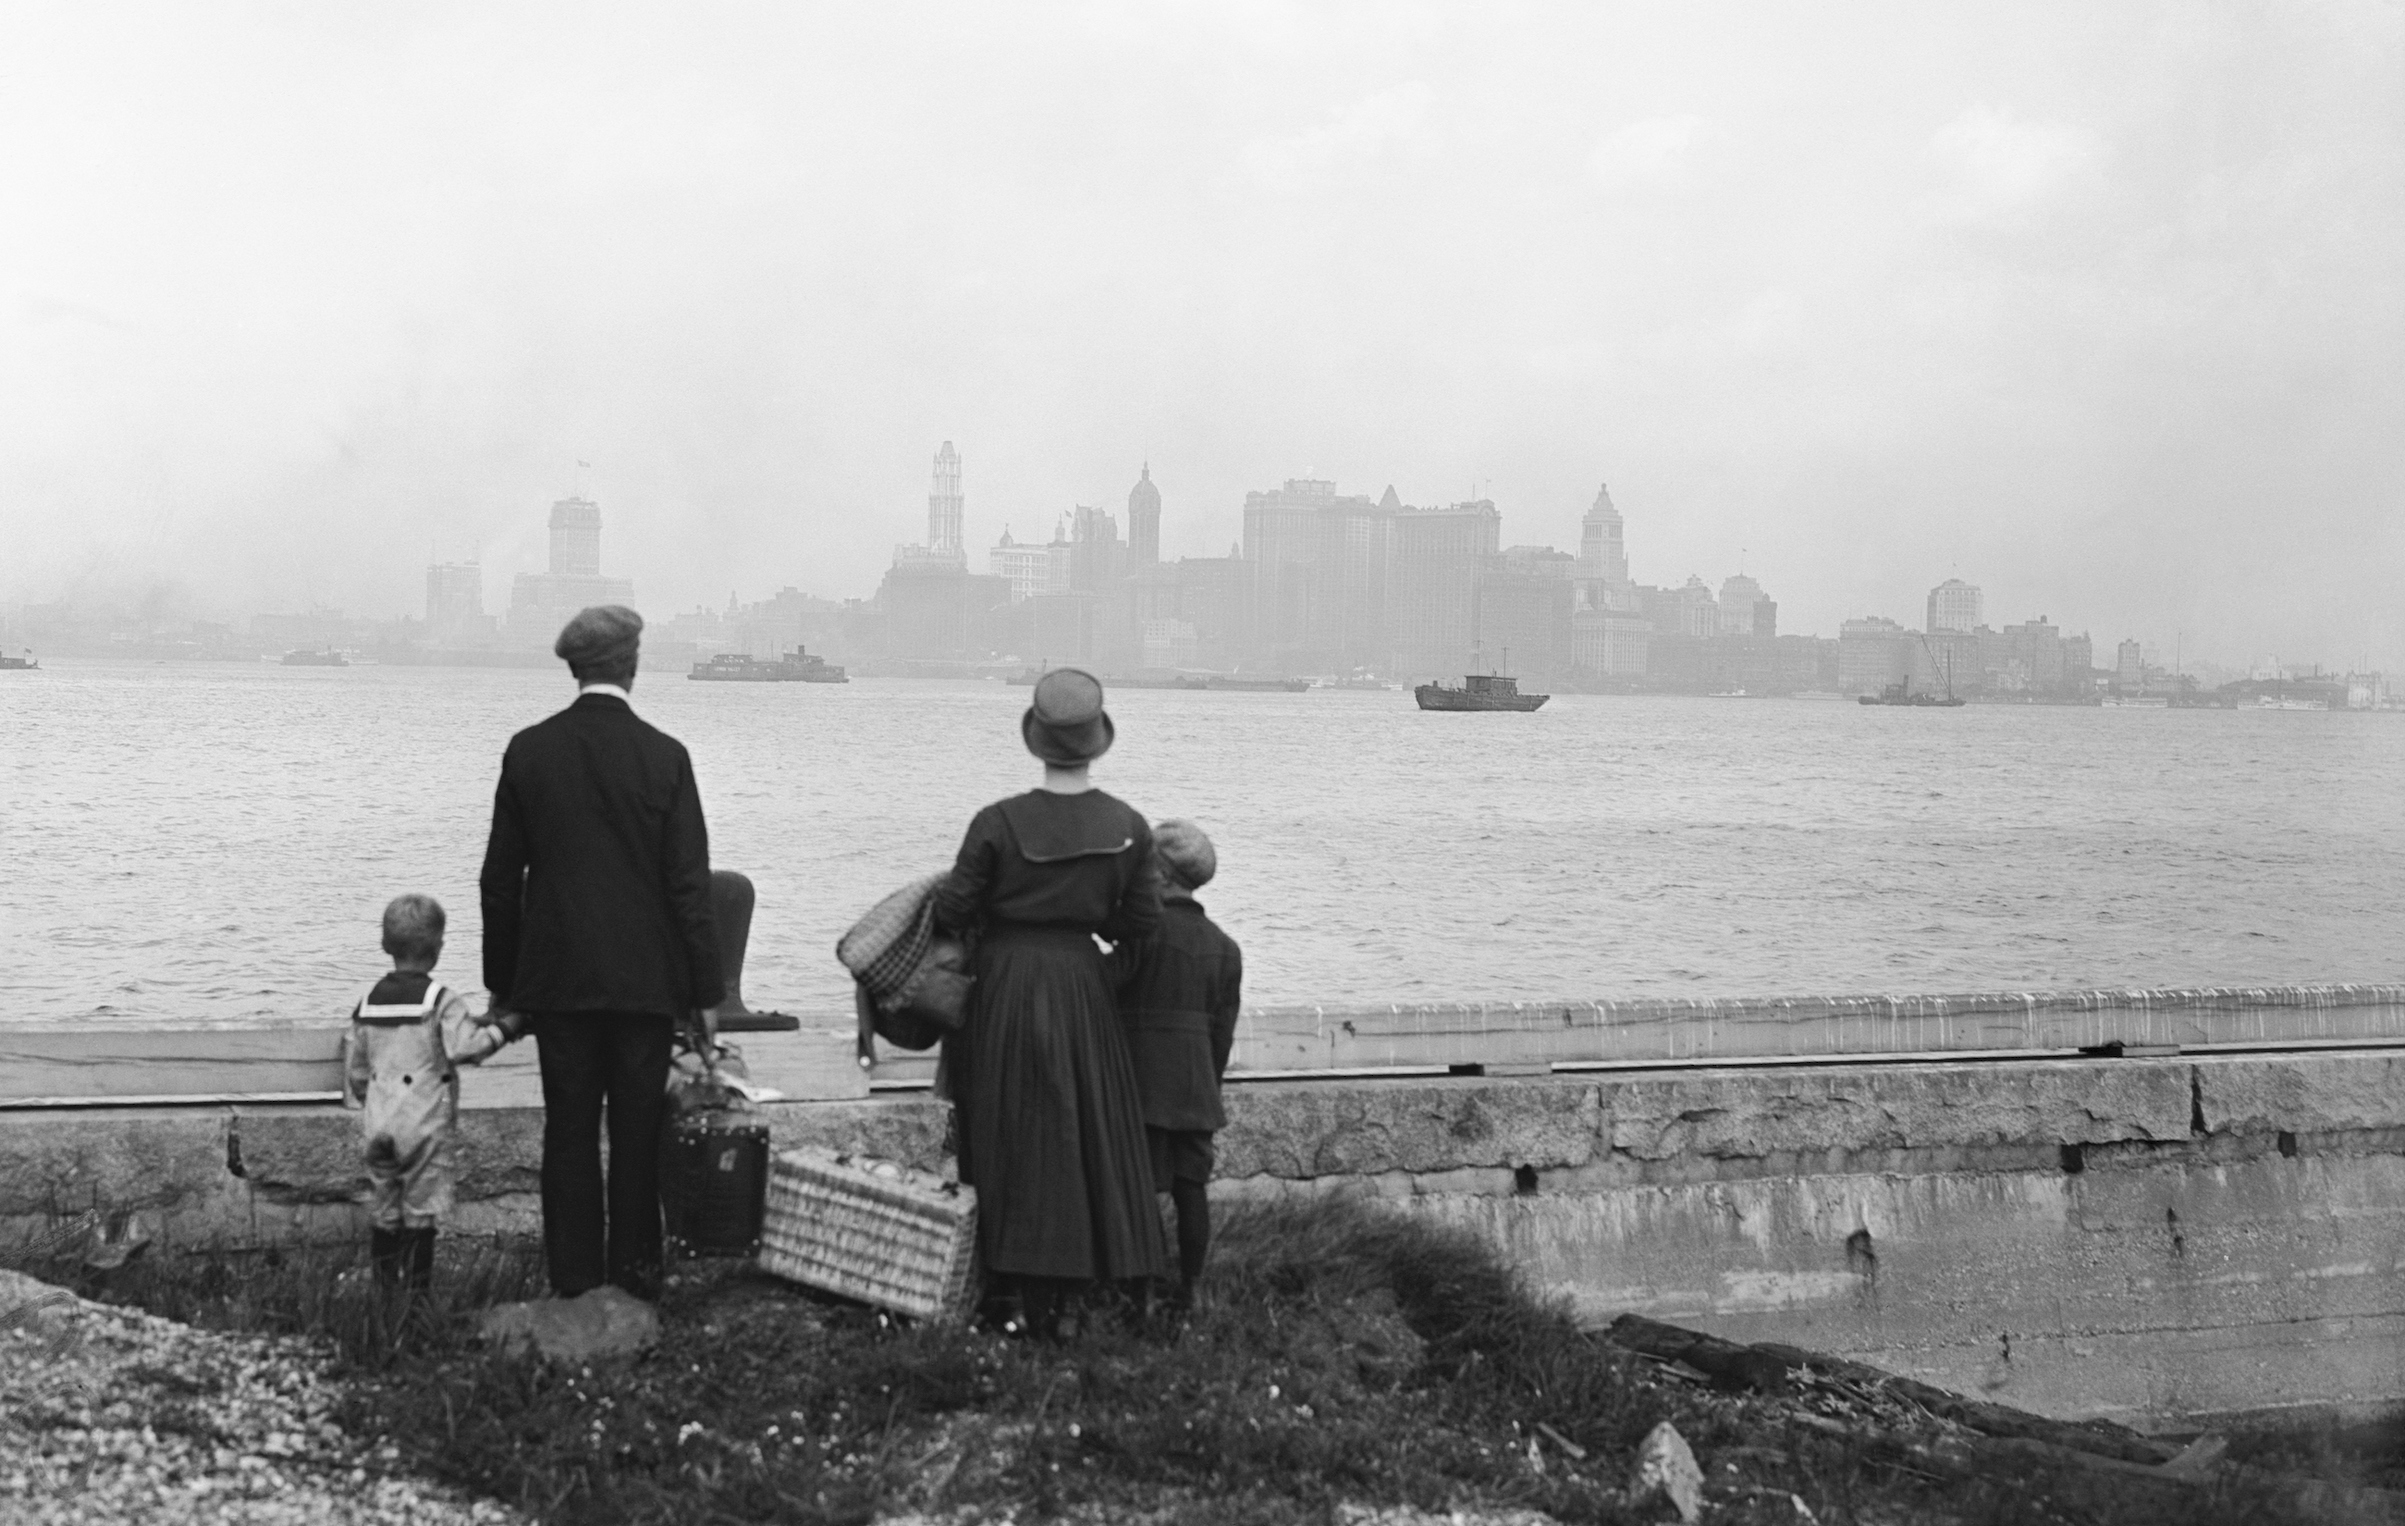 An immigrant family on the dock at Ellis Island, N.Y., looking at New York's skyline while awaiting the ferry to take them there, in 1925. (Bettmann Archive/Getty Images)